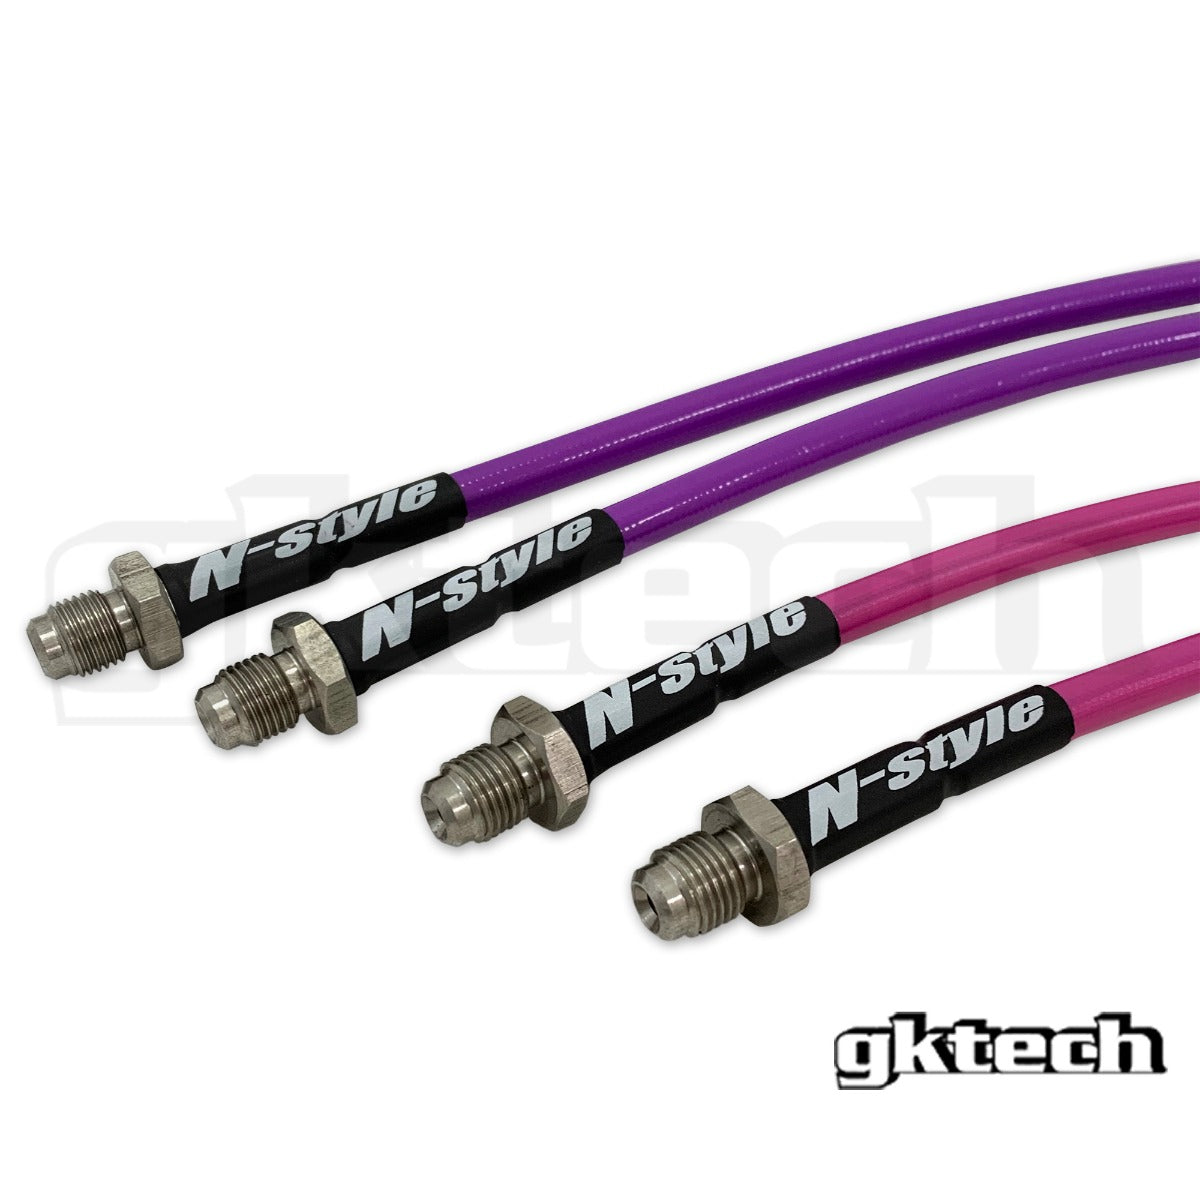 N-Style S14 240sx/S15 to Z32/Skyline conversion braided brake lines